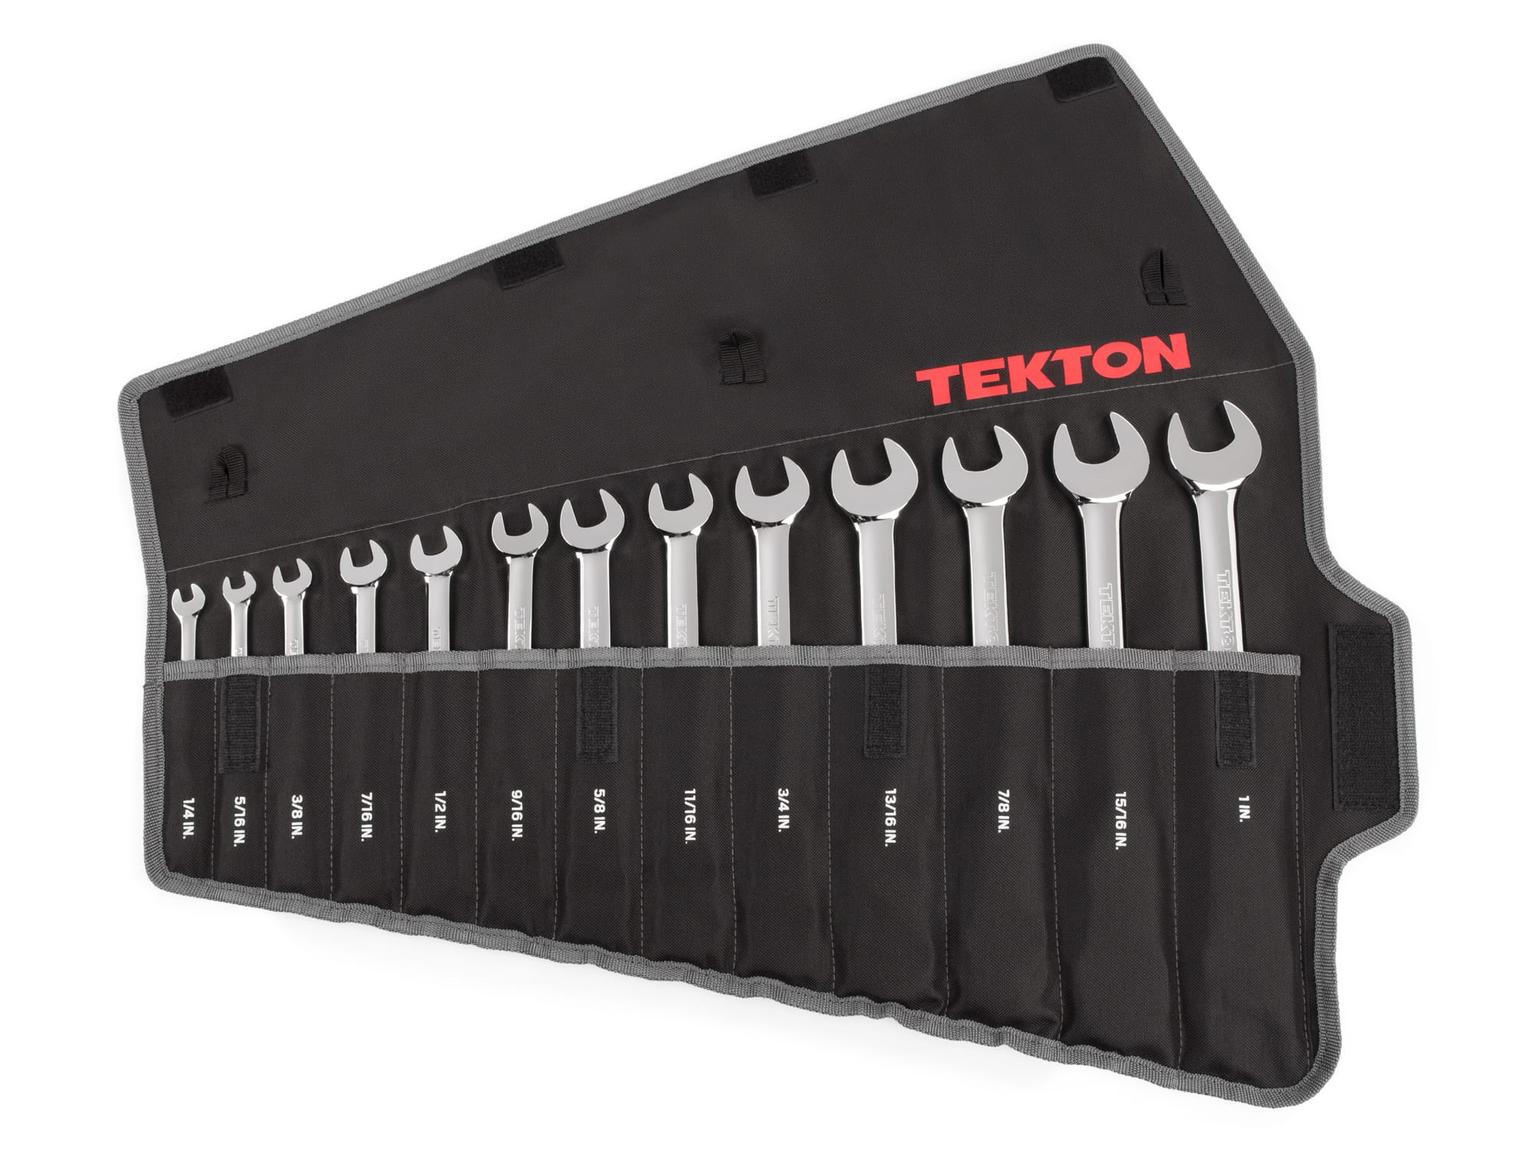 TEKTON WRN53091-T Ratcheting Combination Wrench Set with Pouch, 13-Piece (1/4-1 in.)